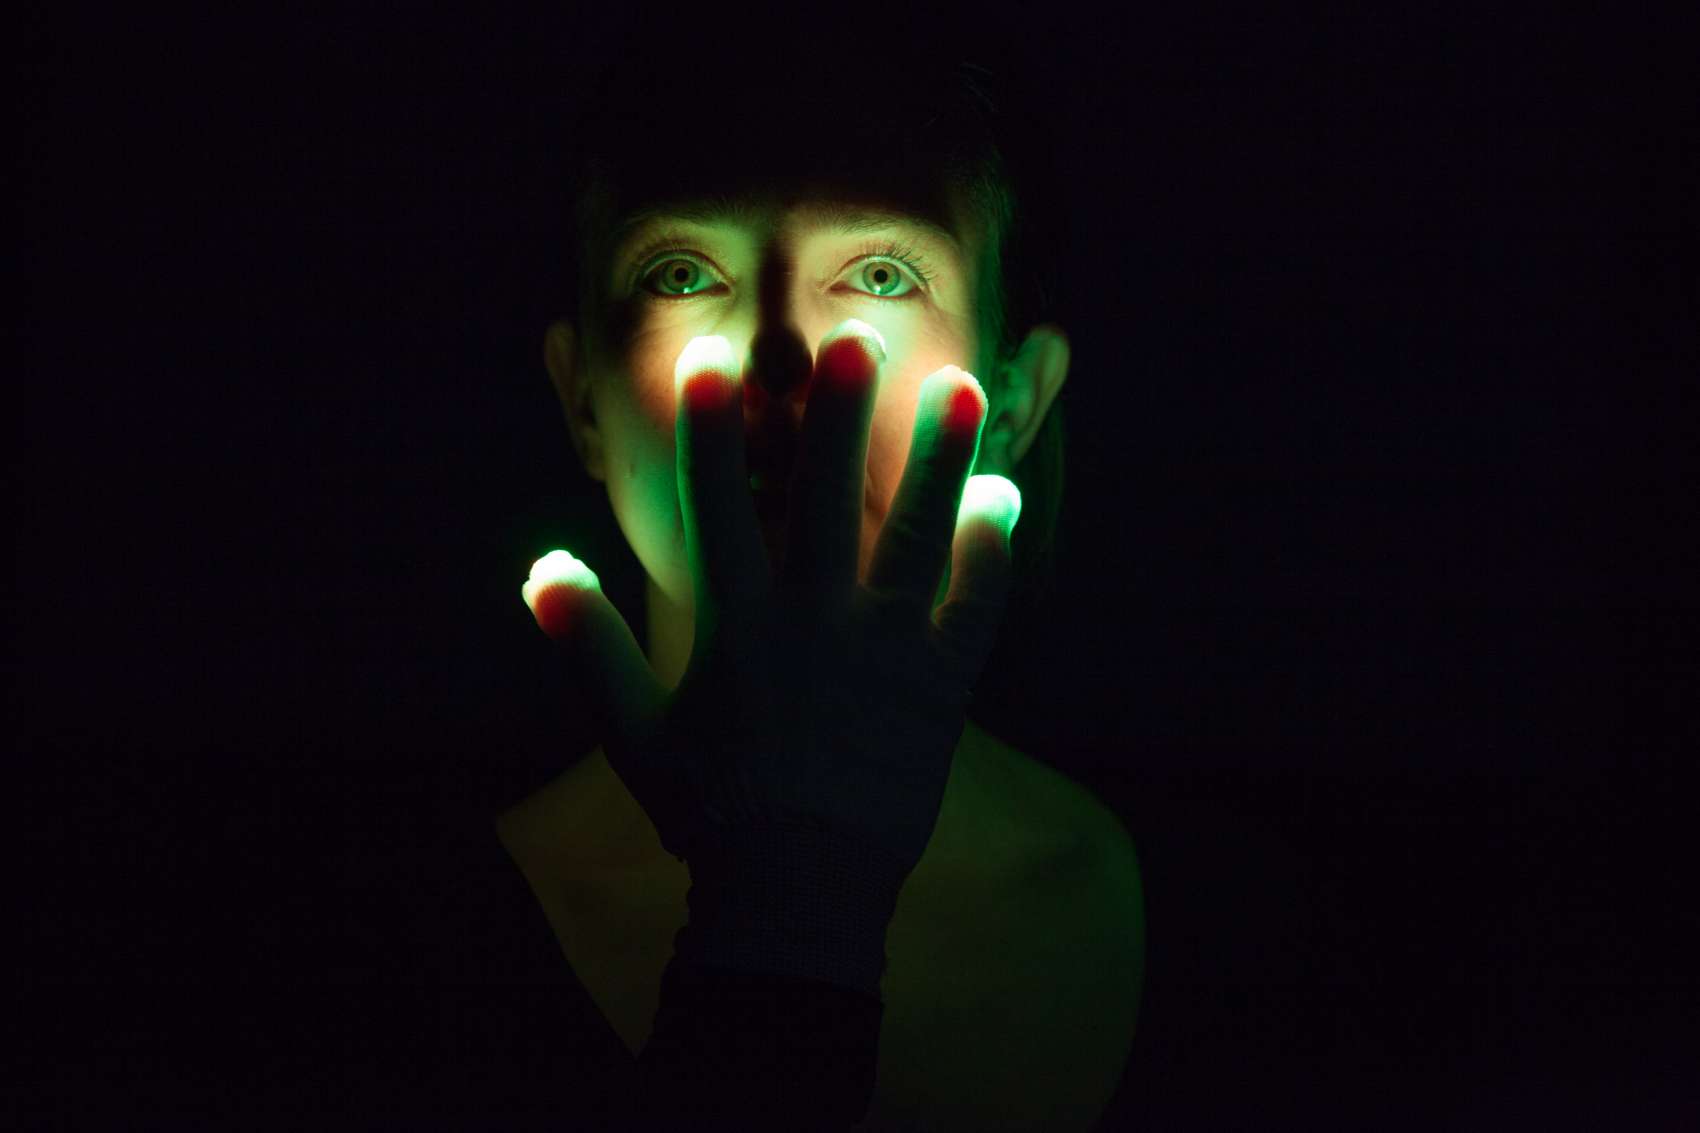 A woman holding her hand in front of her illuminated face against a dark background